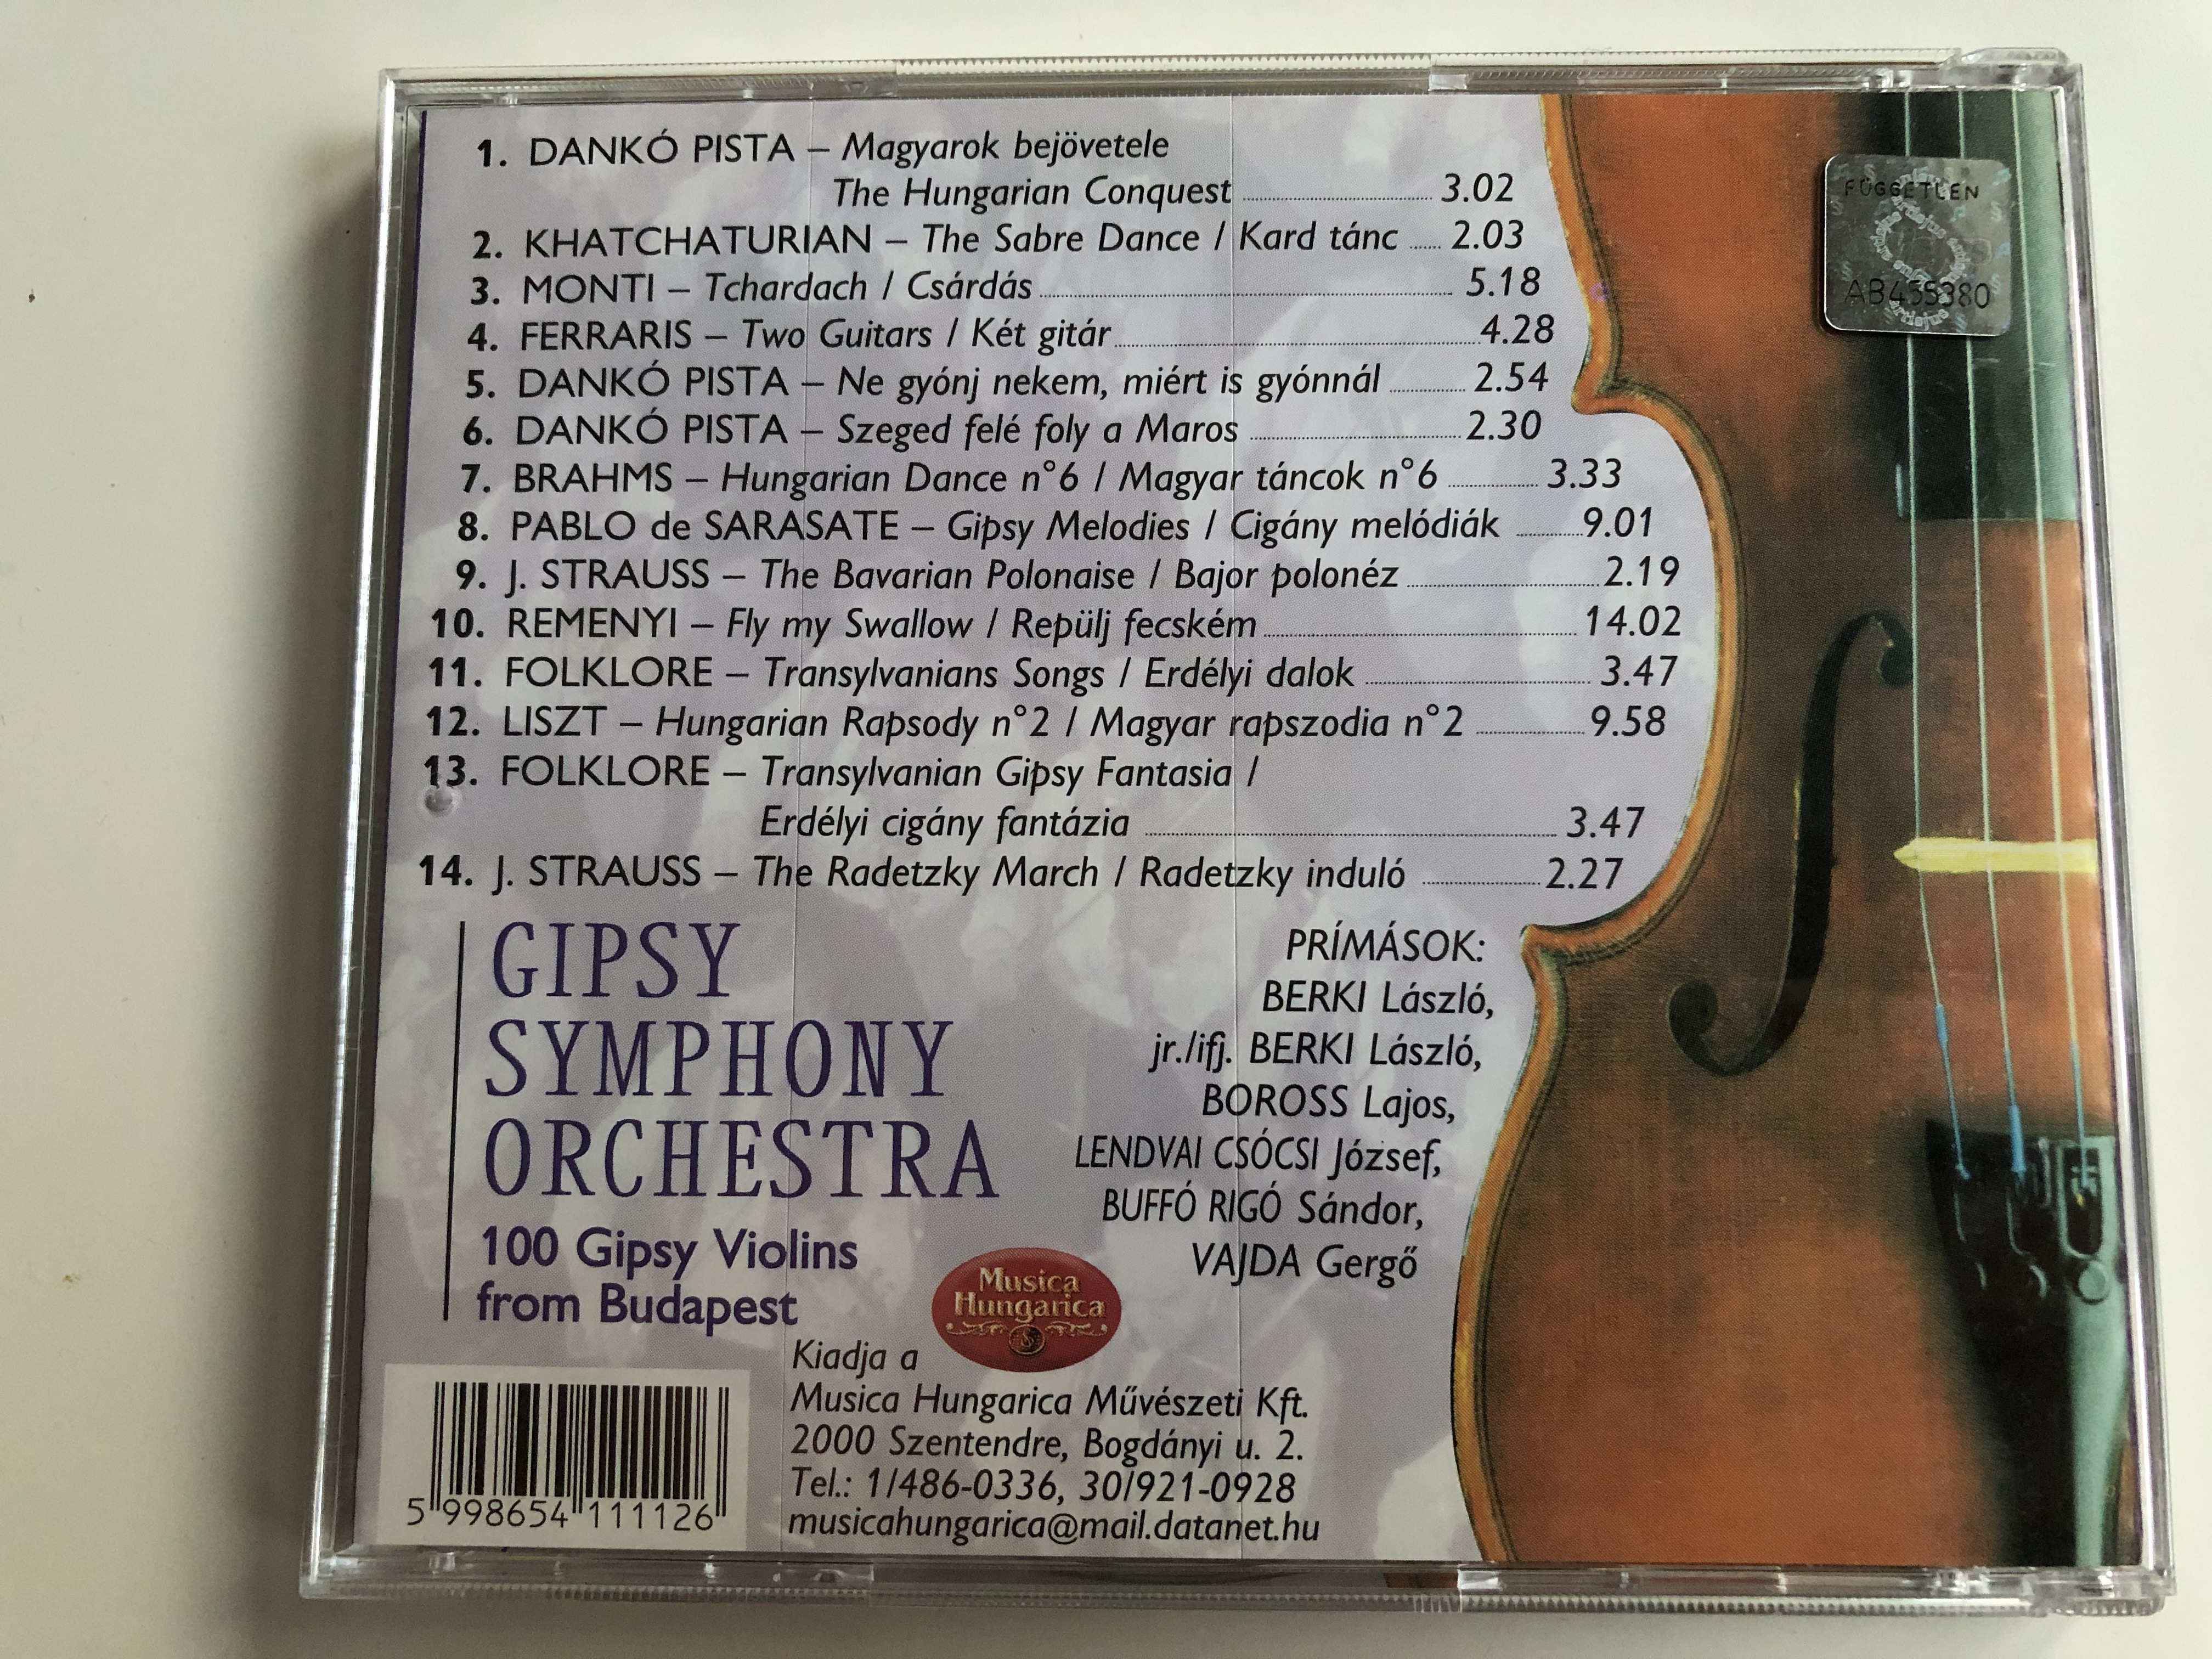 gipsy-symphony-orchestra-100-gypsy-violins-from-budapest-gold-edition-musica-hungarica-audio-cd-1999-stereo-mha-112-9-.jpg